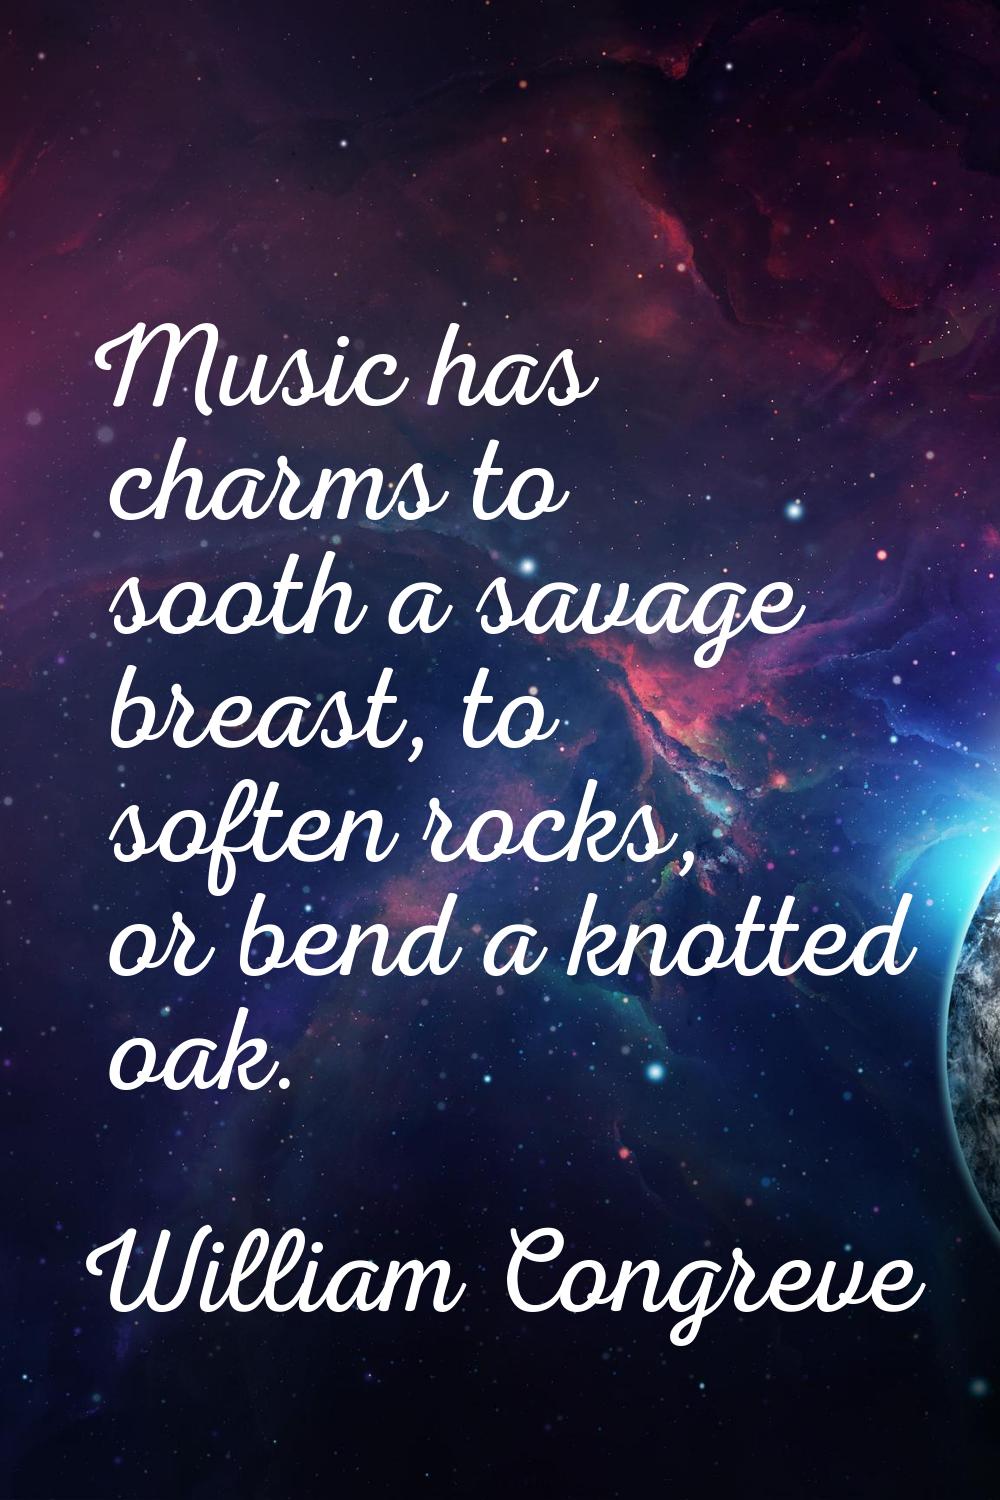 Music has charms to sooth a savage breast, to soften rocks, or bend a knotted oak.